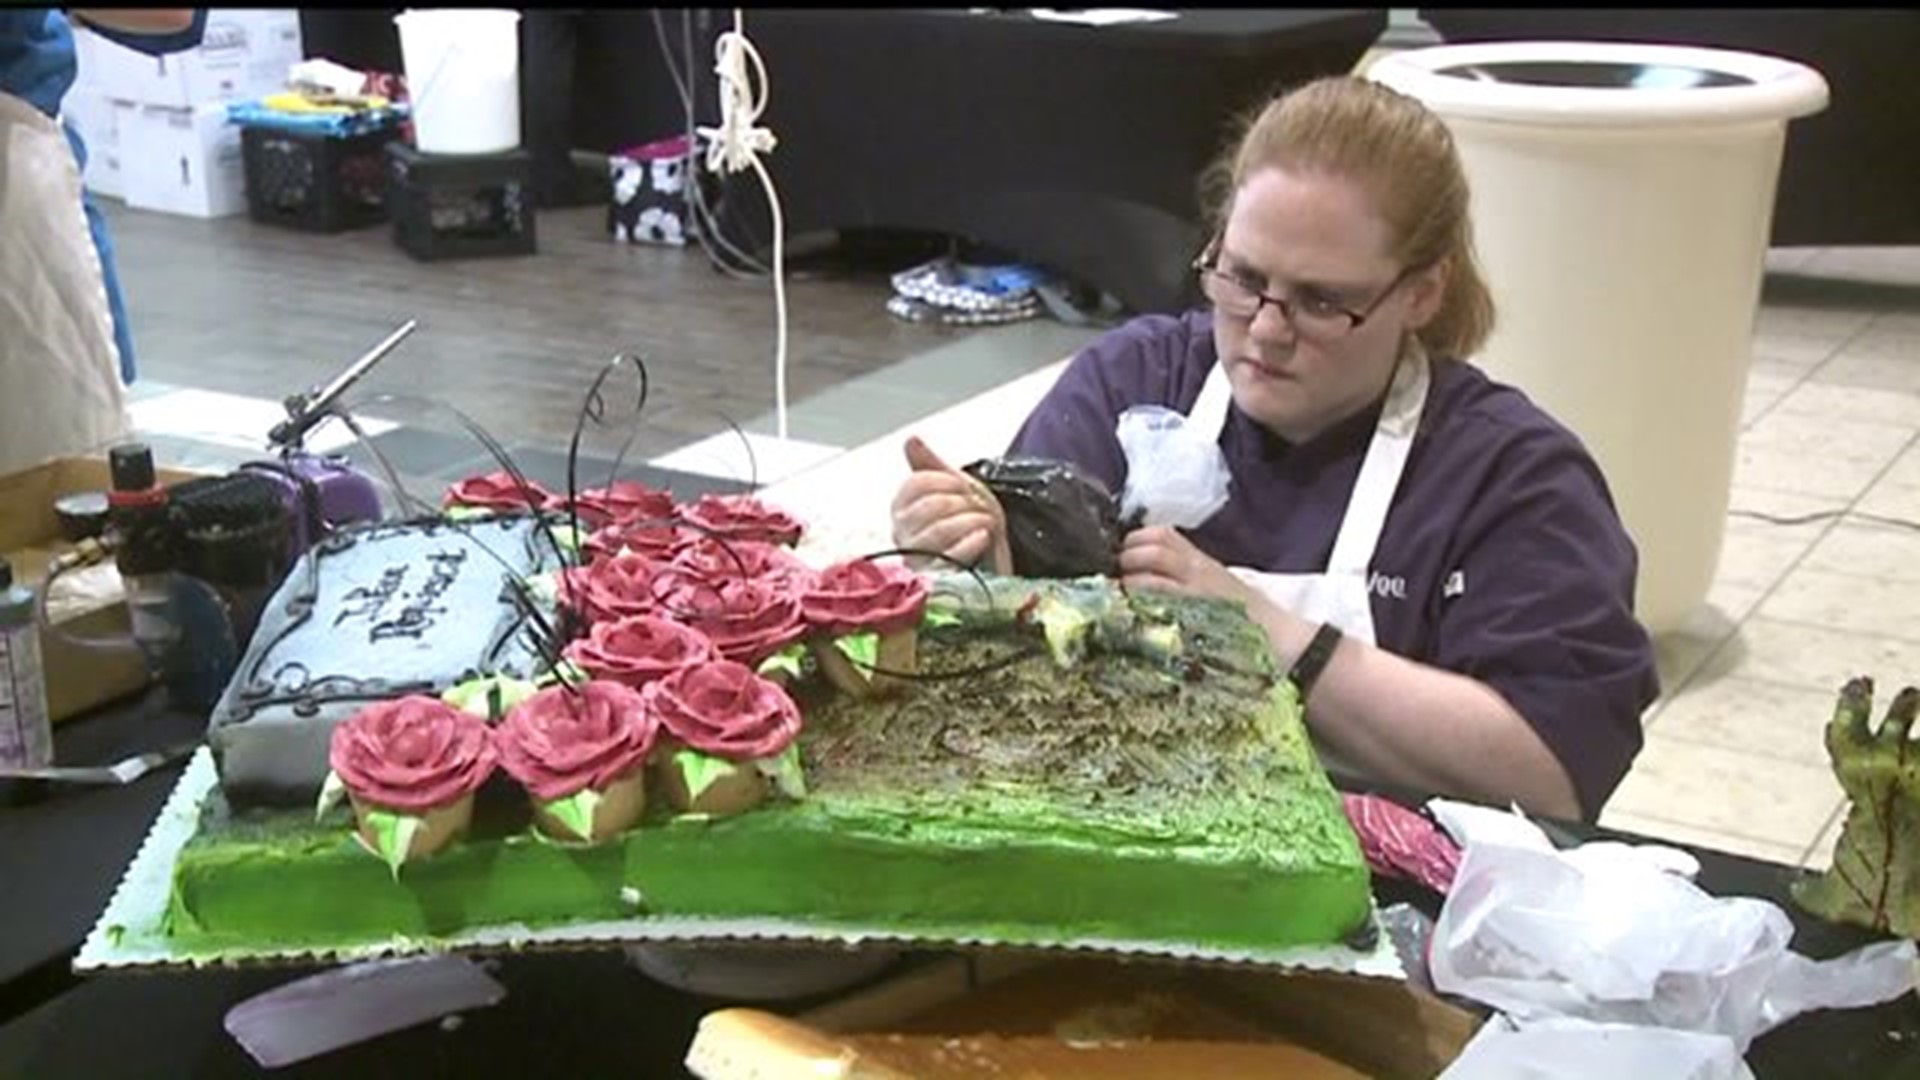 Woman In Digital: Students Compete For Cake Decorating Challenge